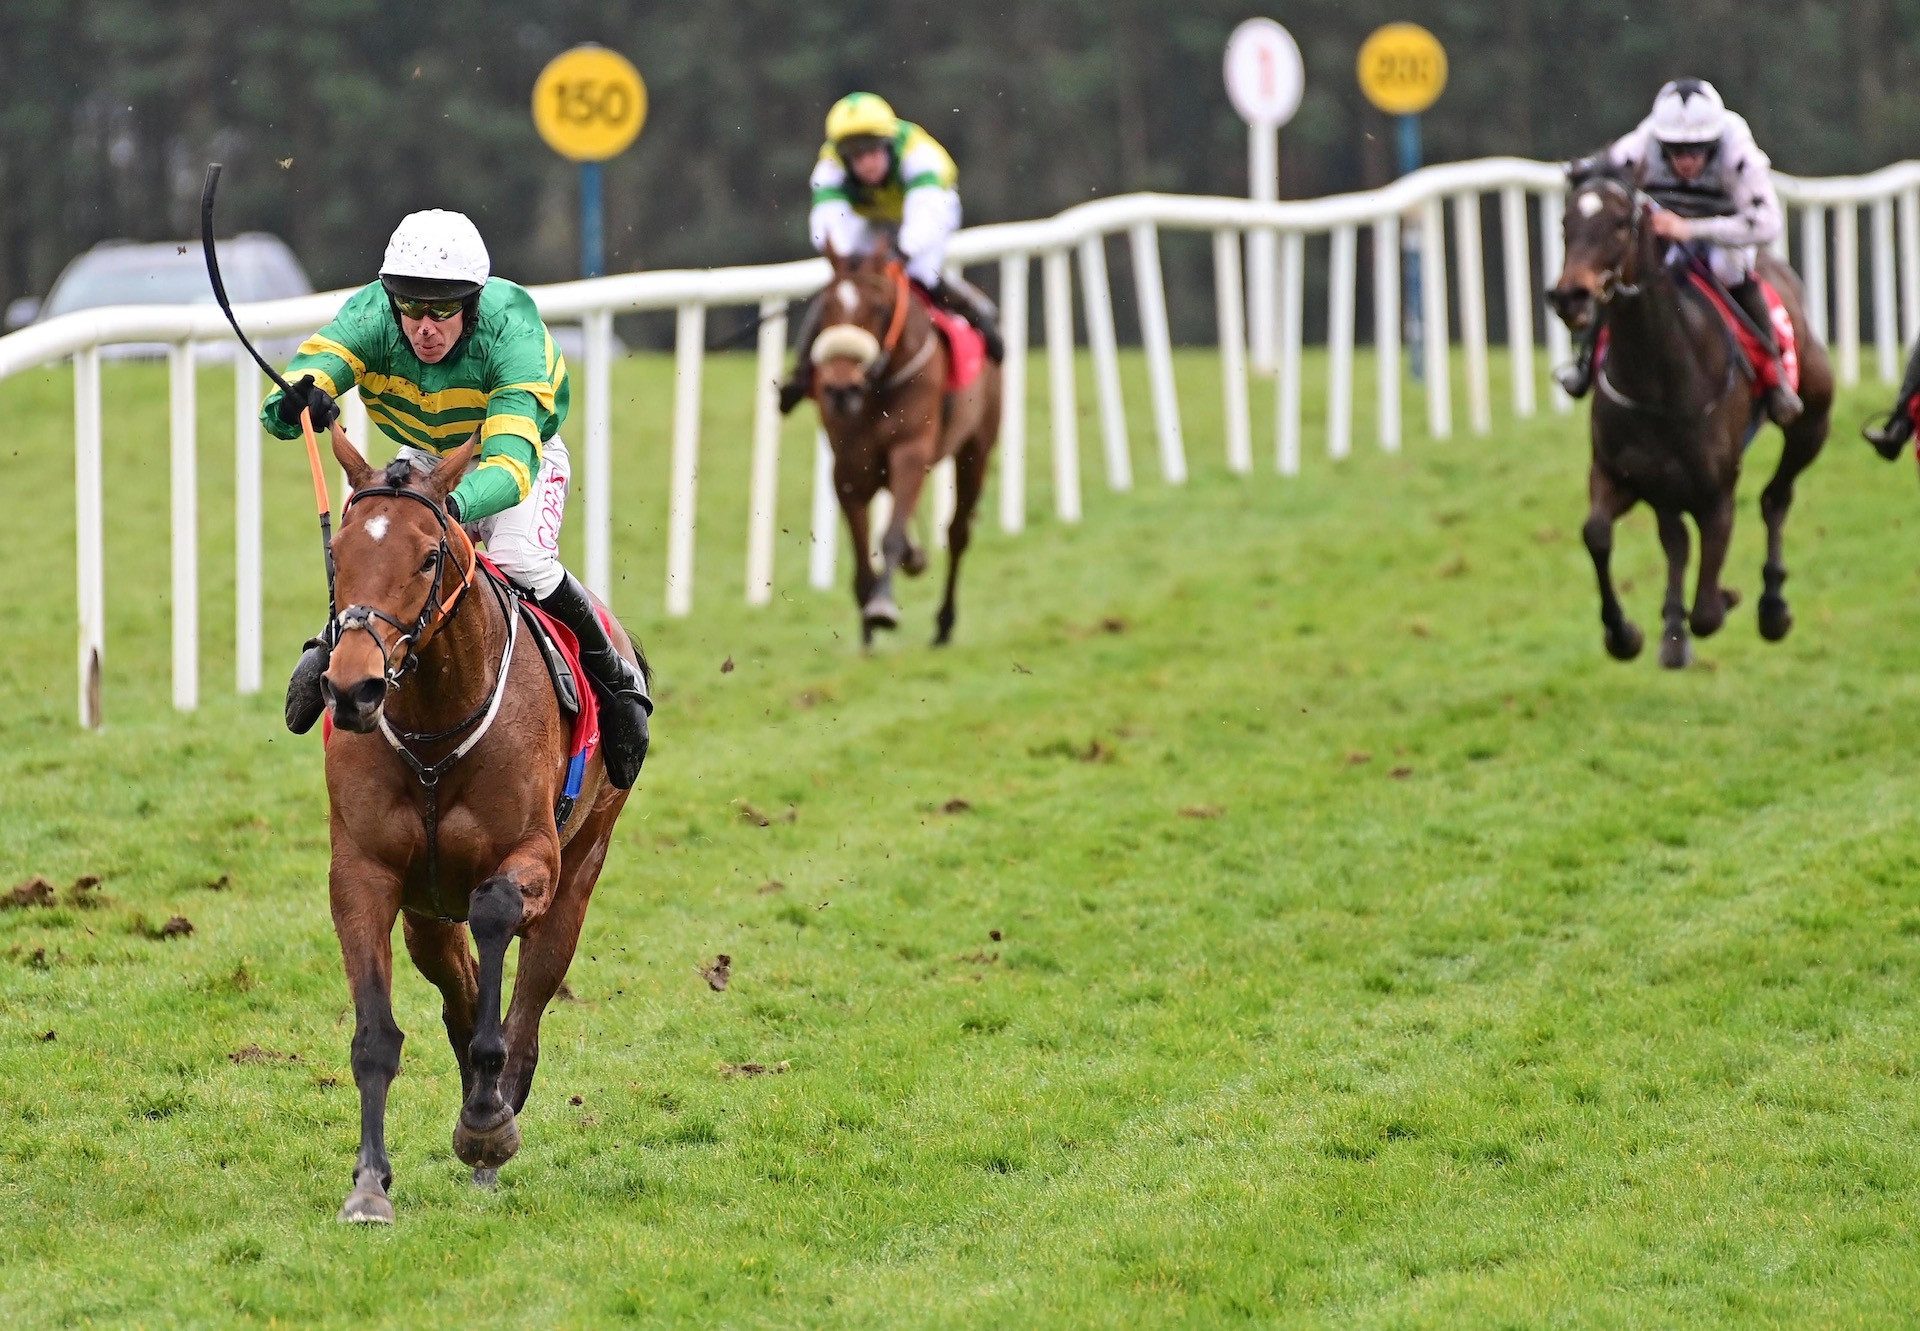 Limerick Lace (Walk In The Park) Impresses On Debut At Punchestown